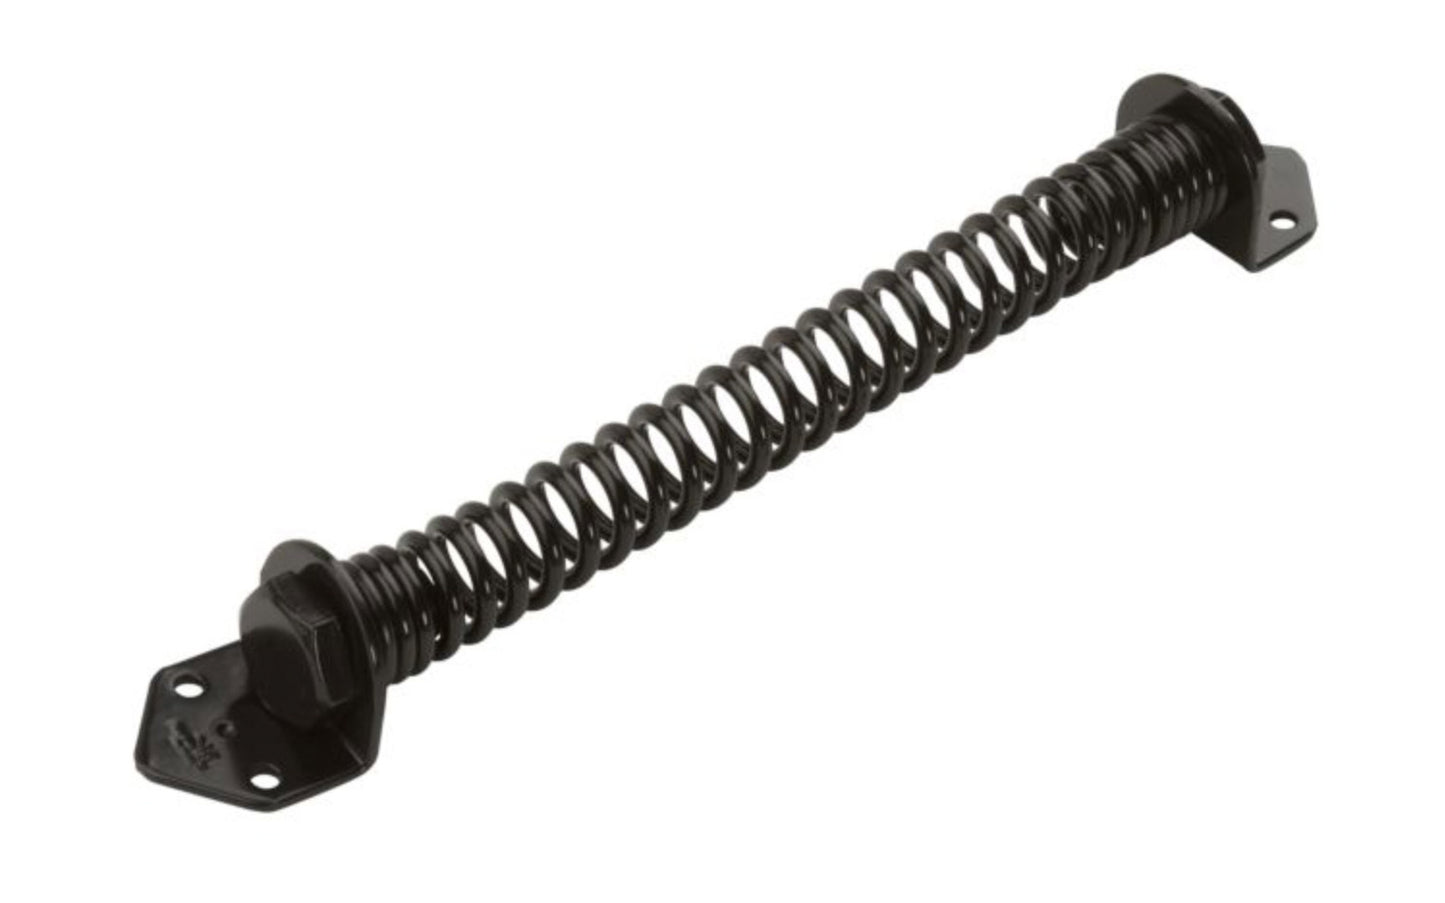 This door & gate spring is a self-closing spring designed to close doors & gates automatically. Closing tension is adjustable. Manufactured from hot rolled steel with triple protected finish for extra corrosion protection. Black powder coated finish. Available in 11" & 14" lengths.